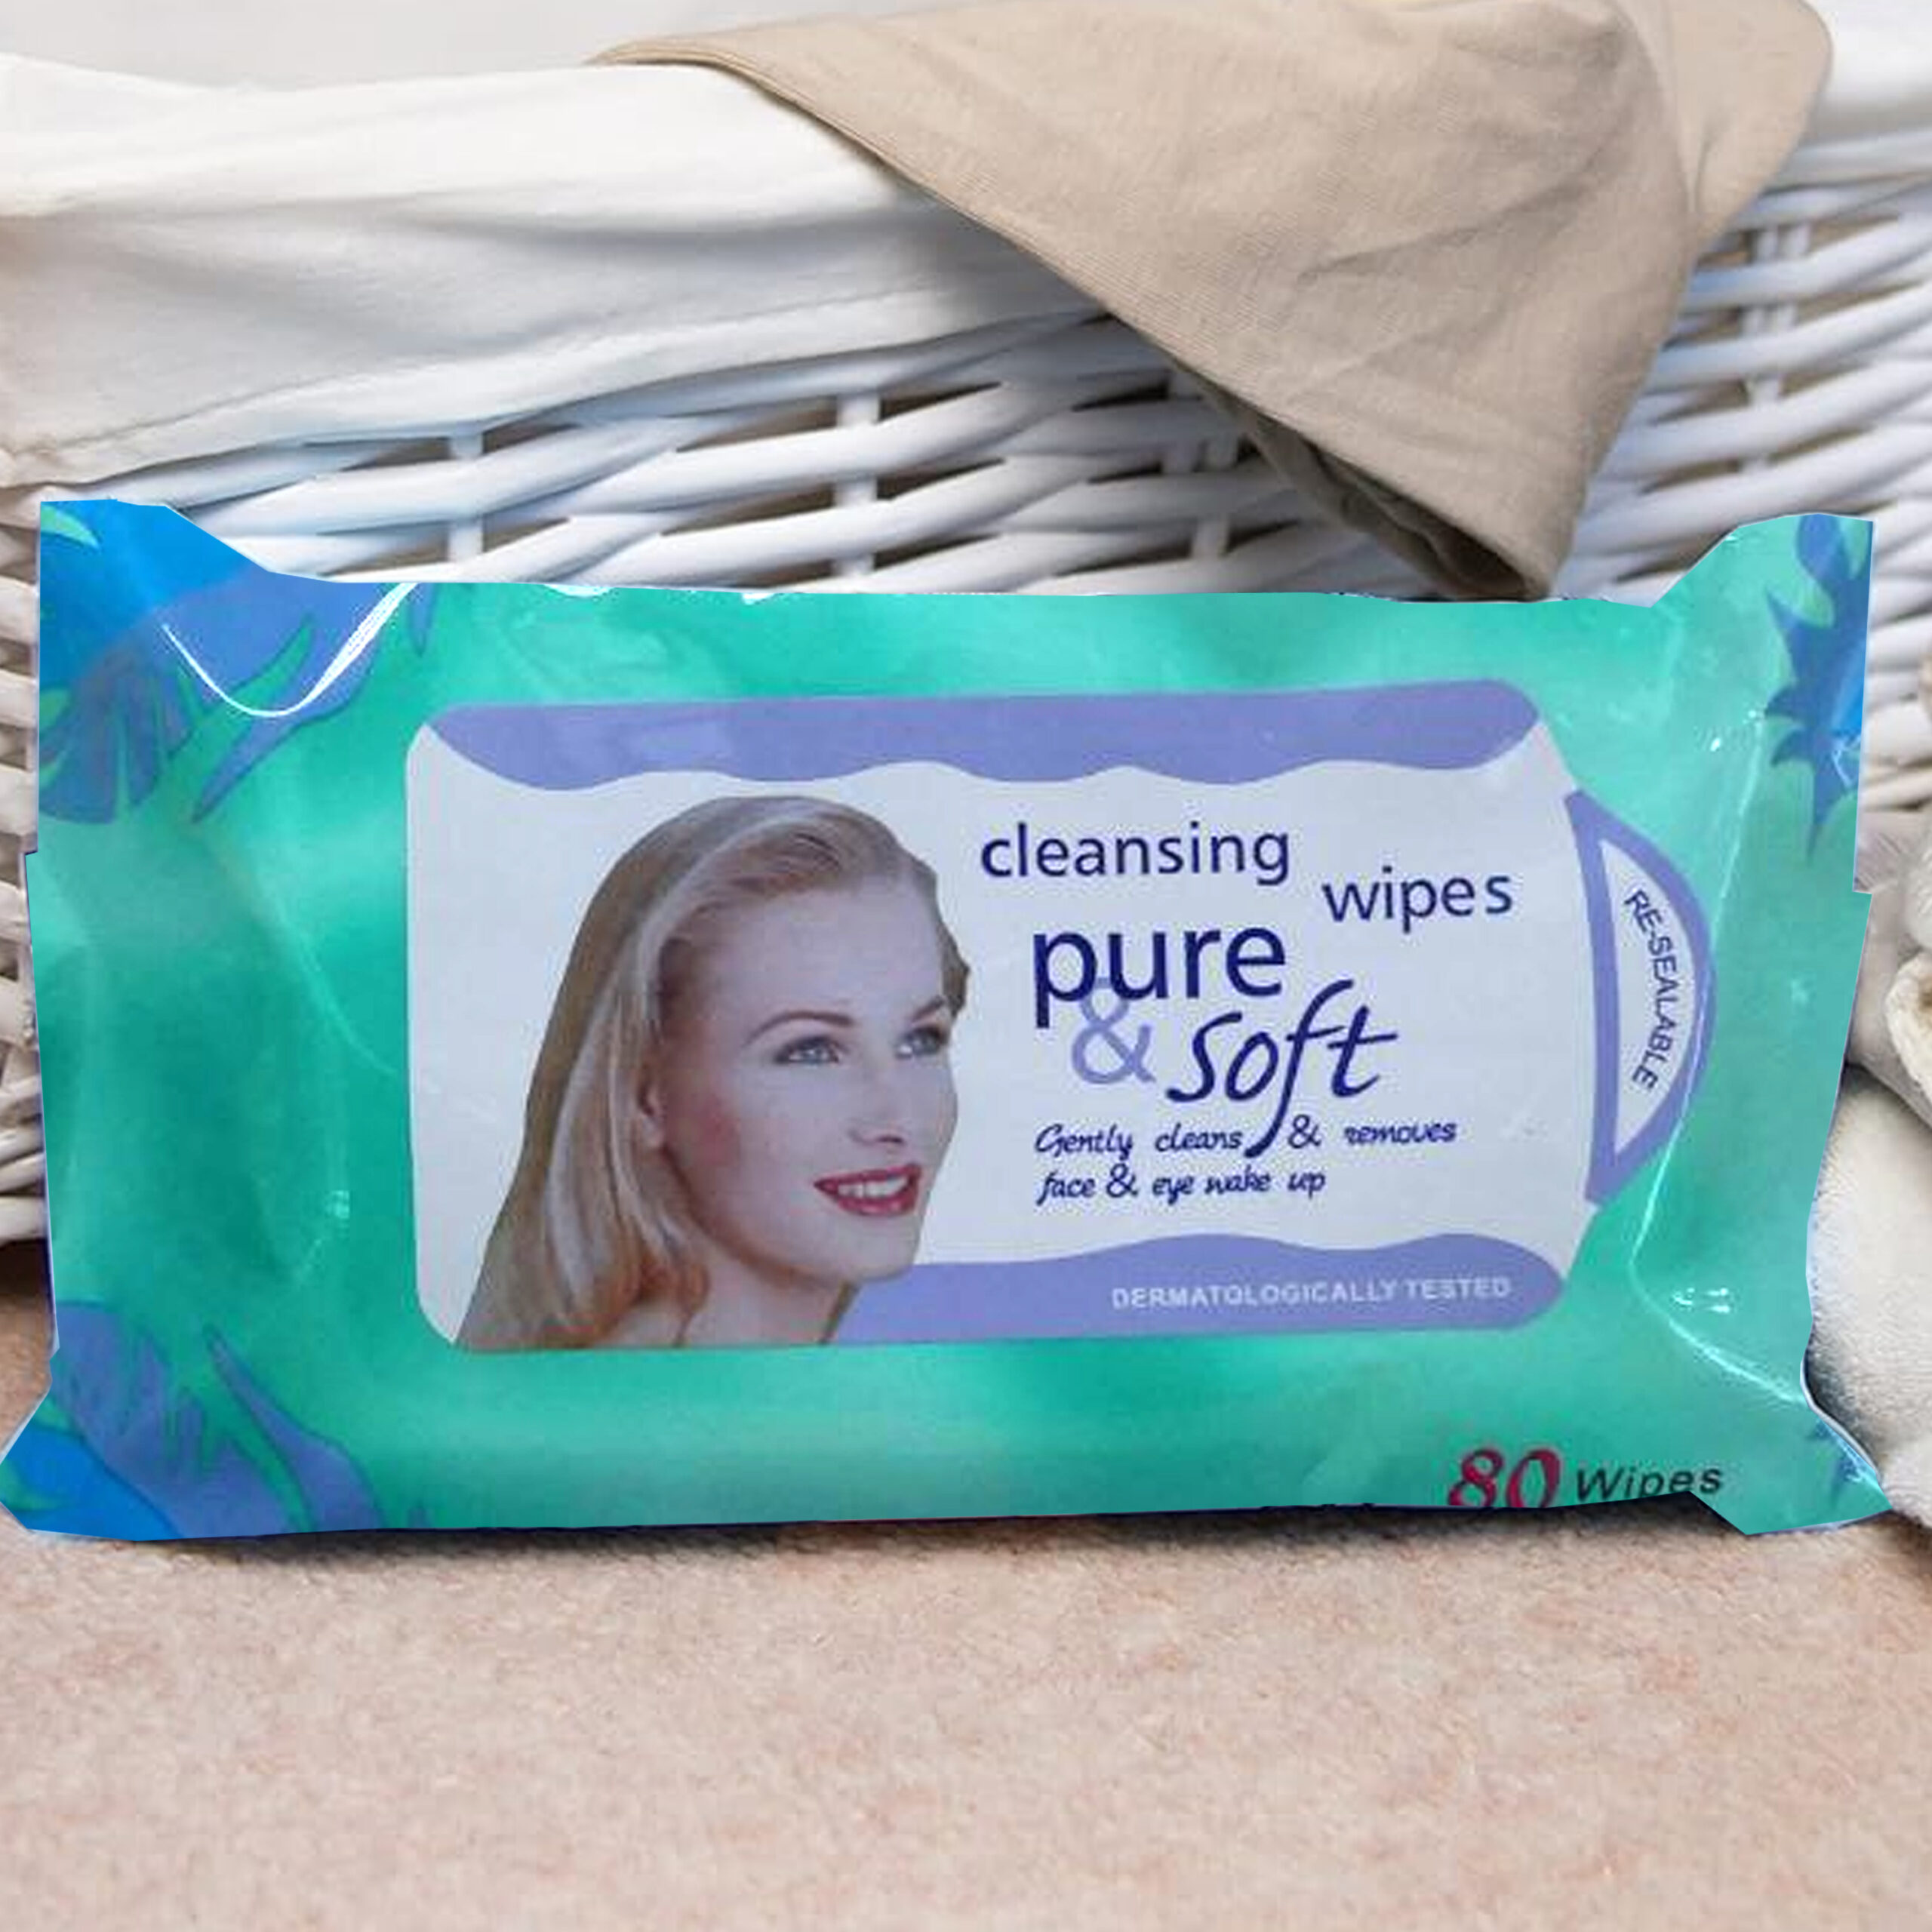 LADY CLEANSING
WET WIPES (1x80)